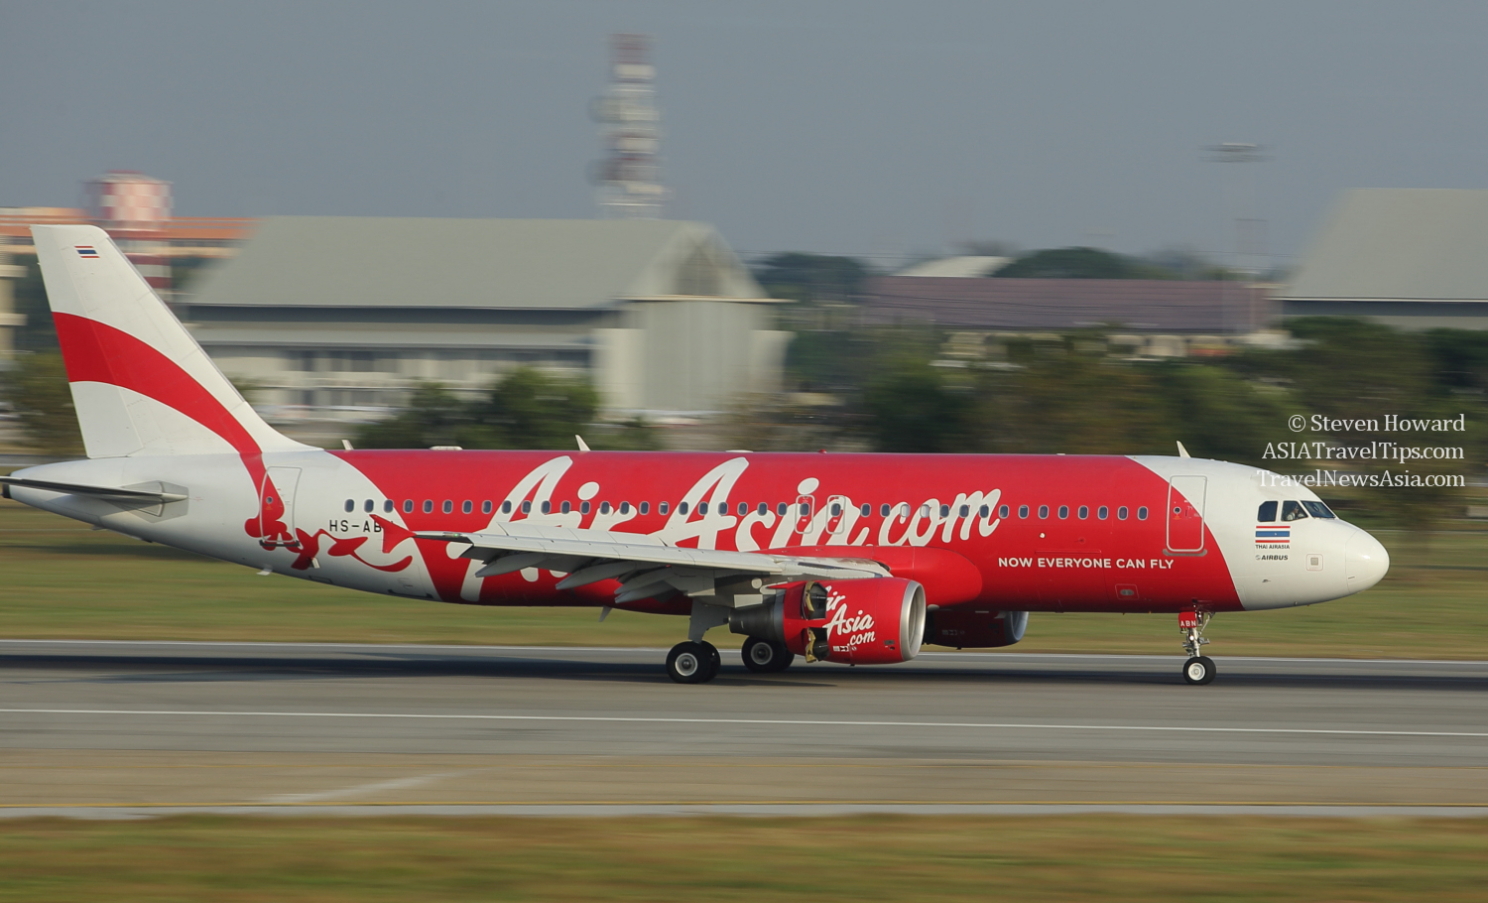 Thai AirAsia A320 at DMK. Picture by Steven Howard of TravelNewsAsia.com Click to enlarge.